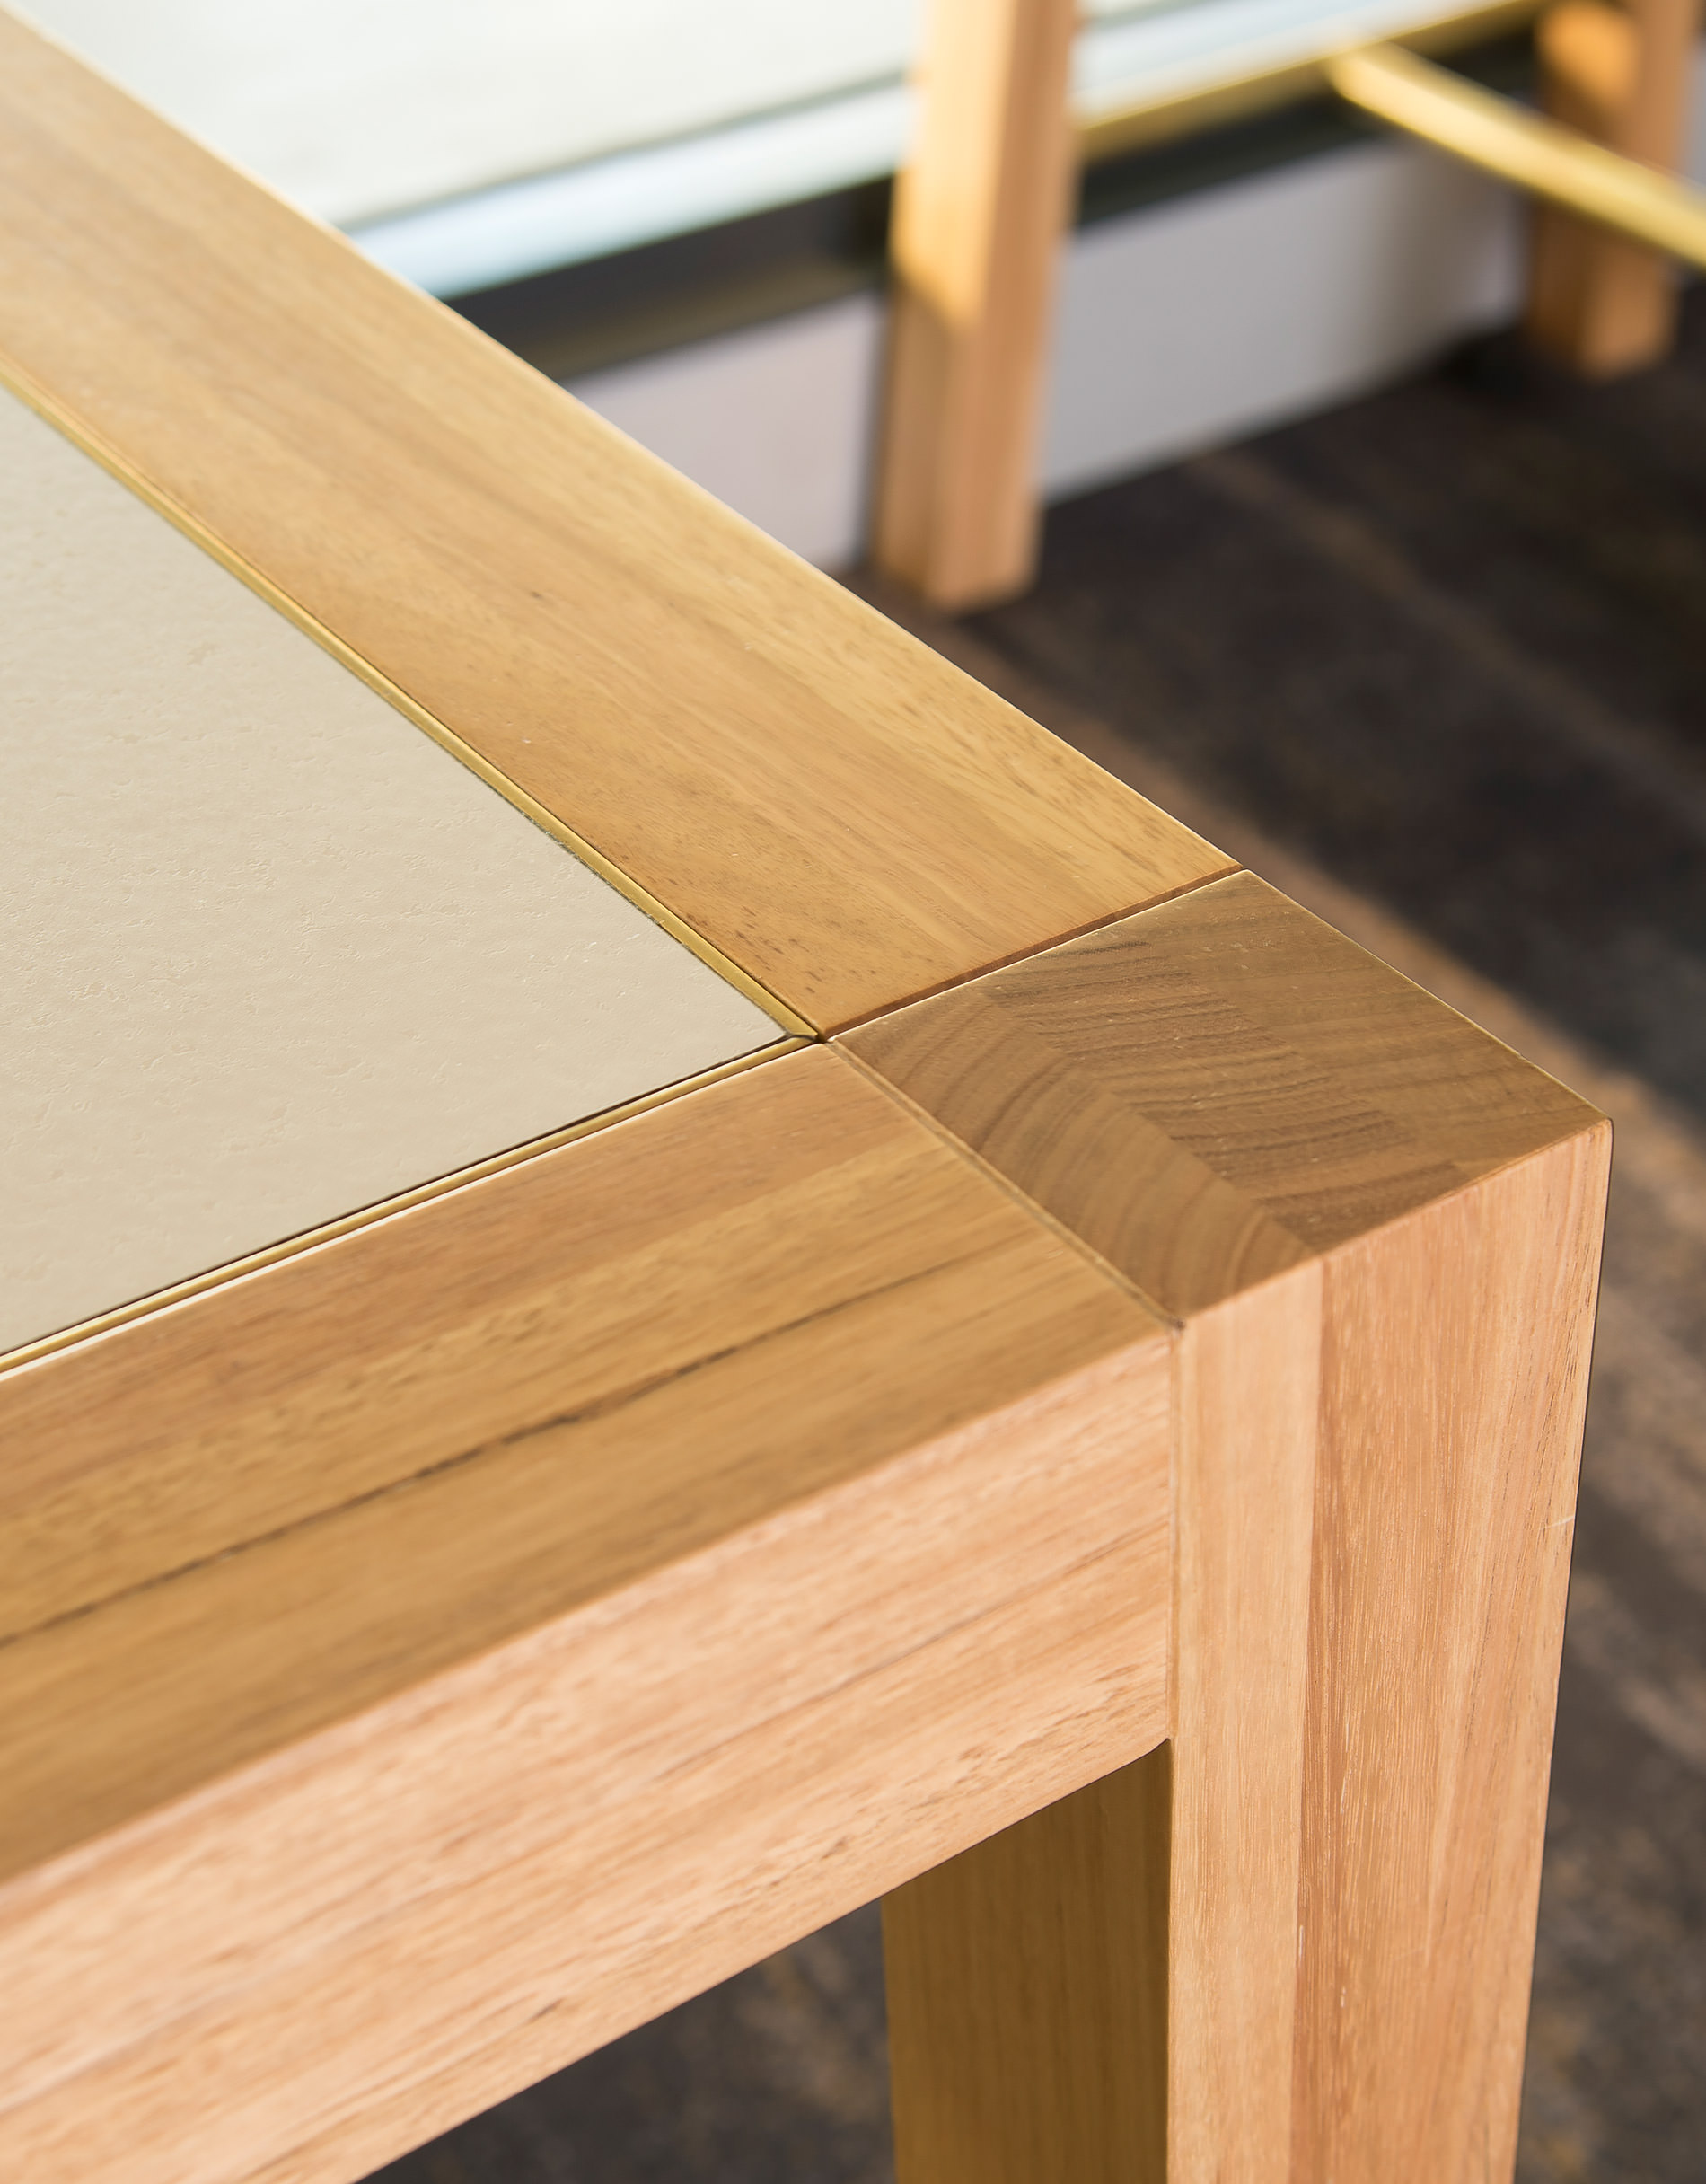 Your eye zooms in on a detail of this solid wood designer table by Australian designer FrancoCrea